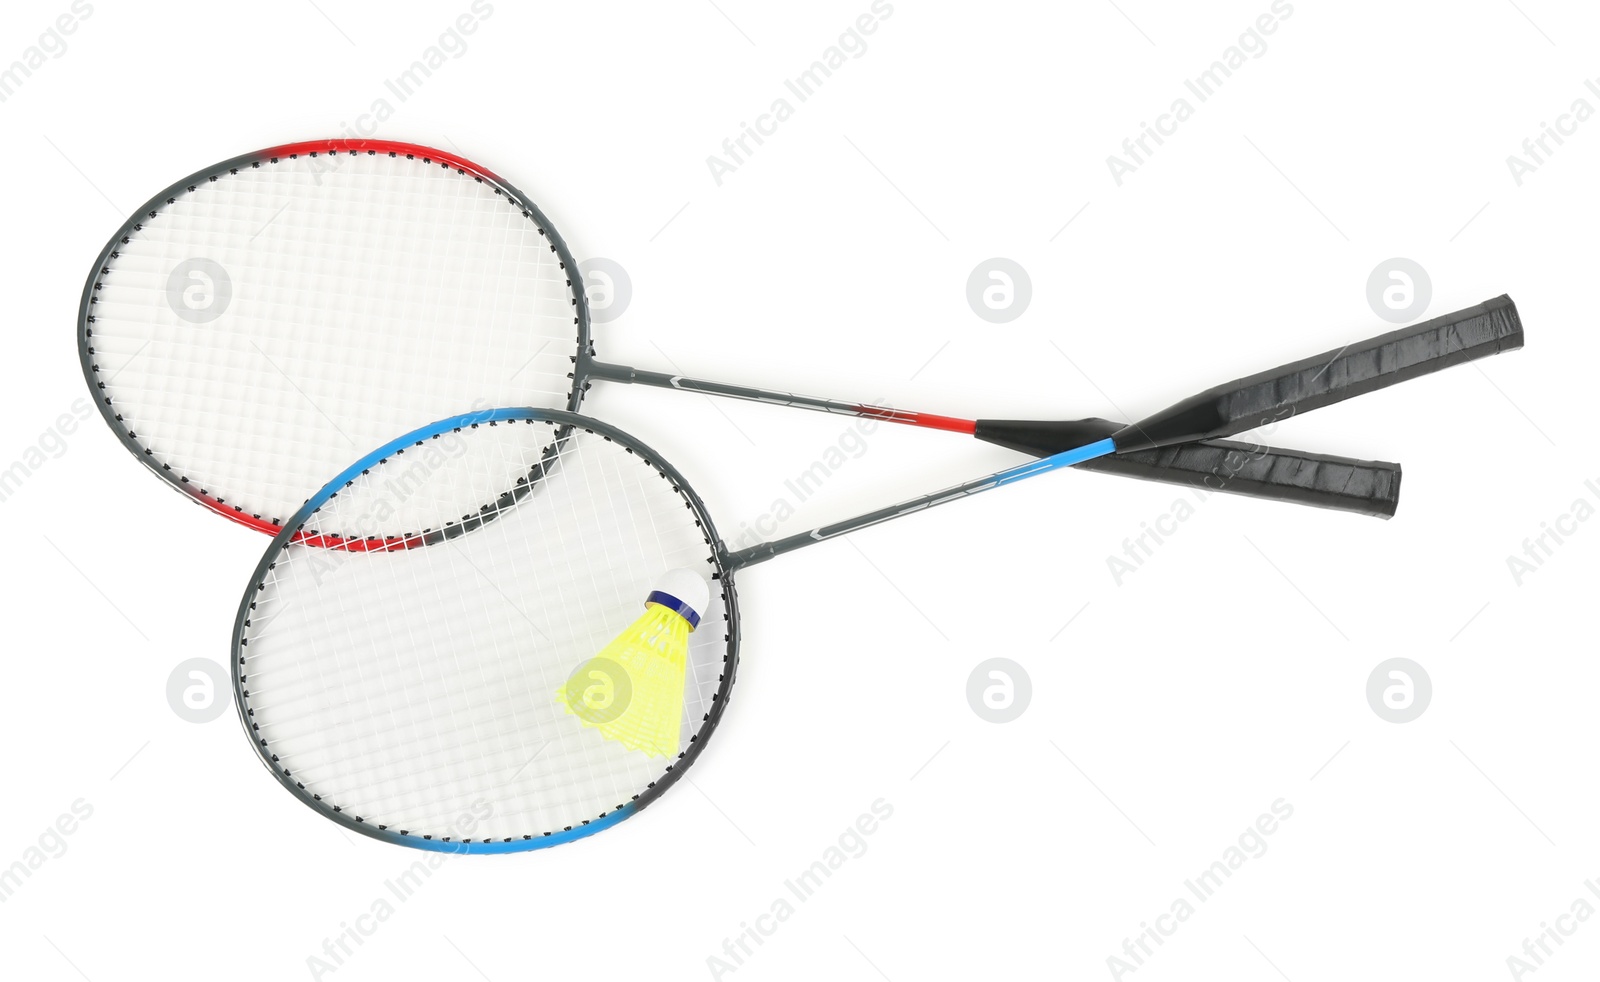 Photo of Rackets and shuttlecock on white background, top view. Badminton equipment